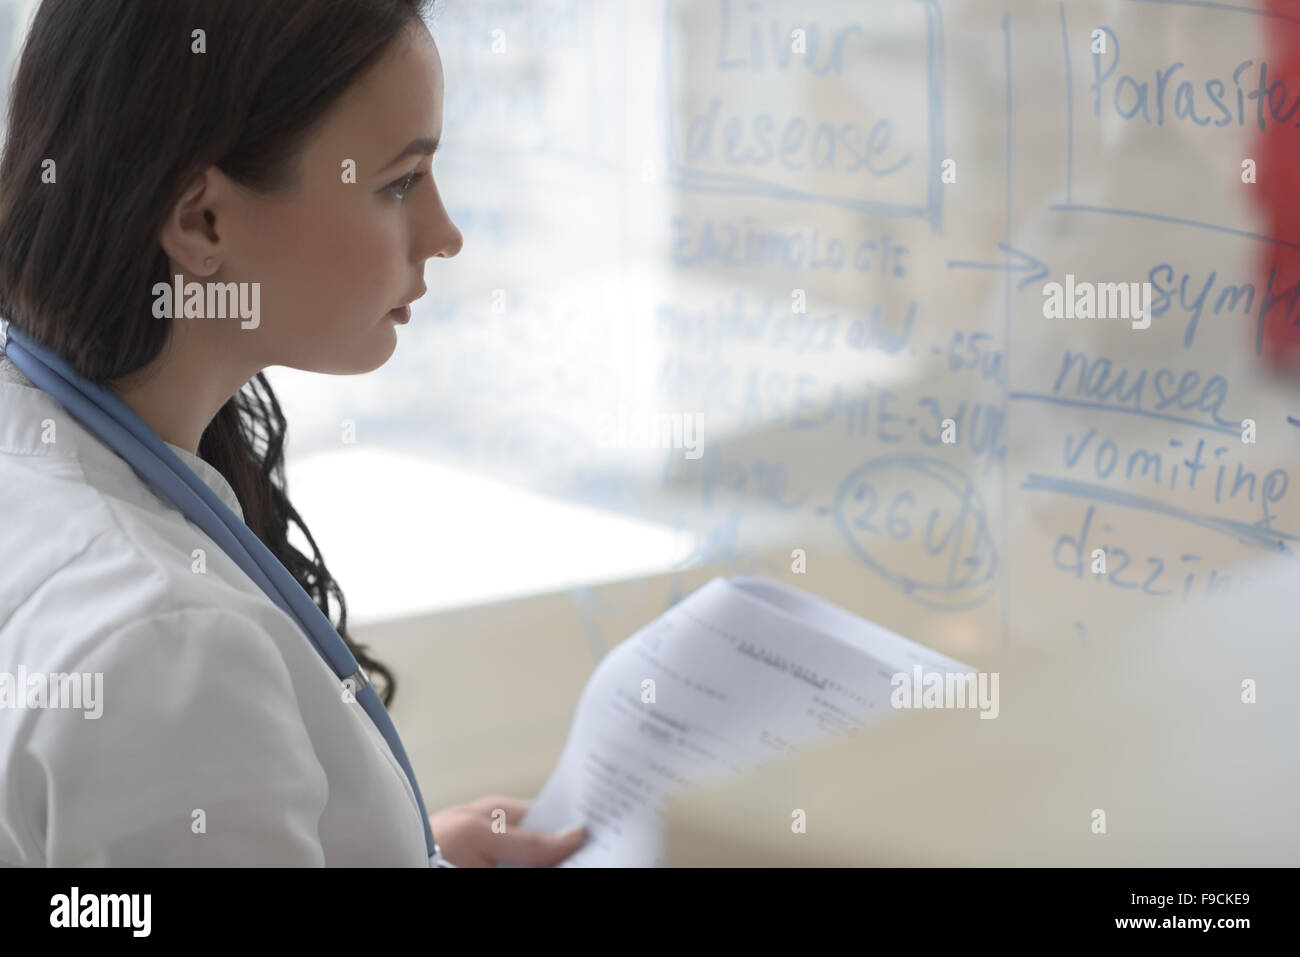 Female medical doctor working at clinic office. Writing on glass whiteboard symptoms and test results of her patient to diagnose Stock Photo